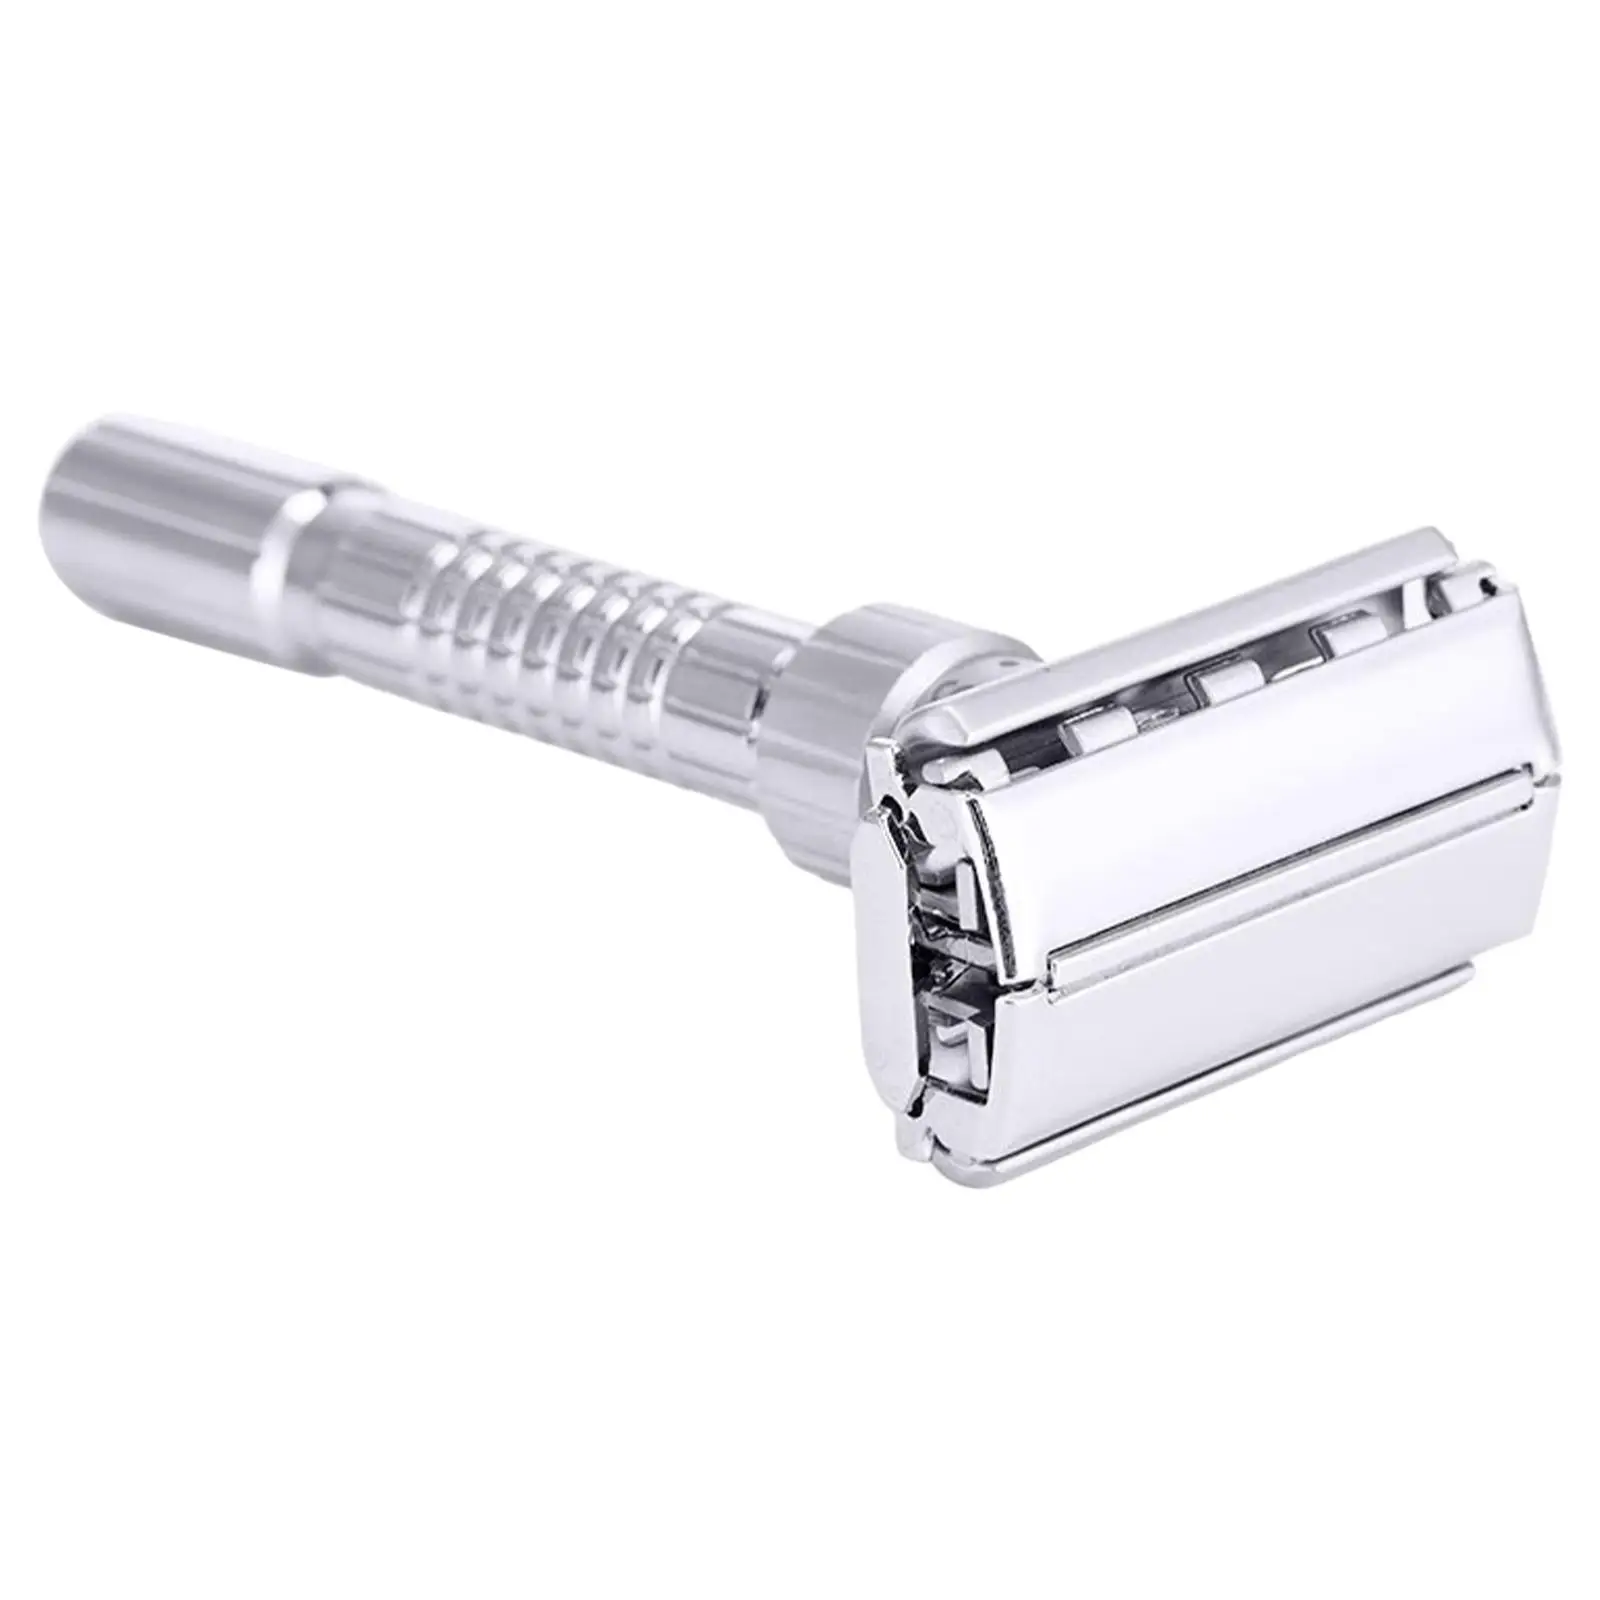 Manual  Safety  with 5  Zinc Alloy  Reusable, Safety  Shaving  Everyday Use, Travel Men